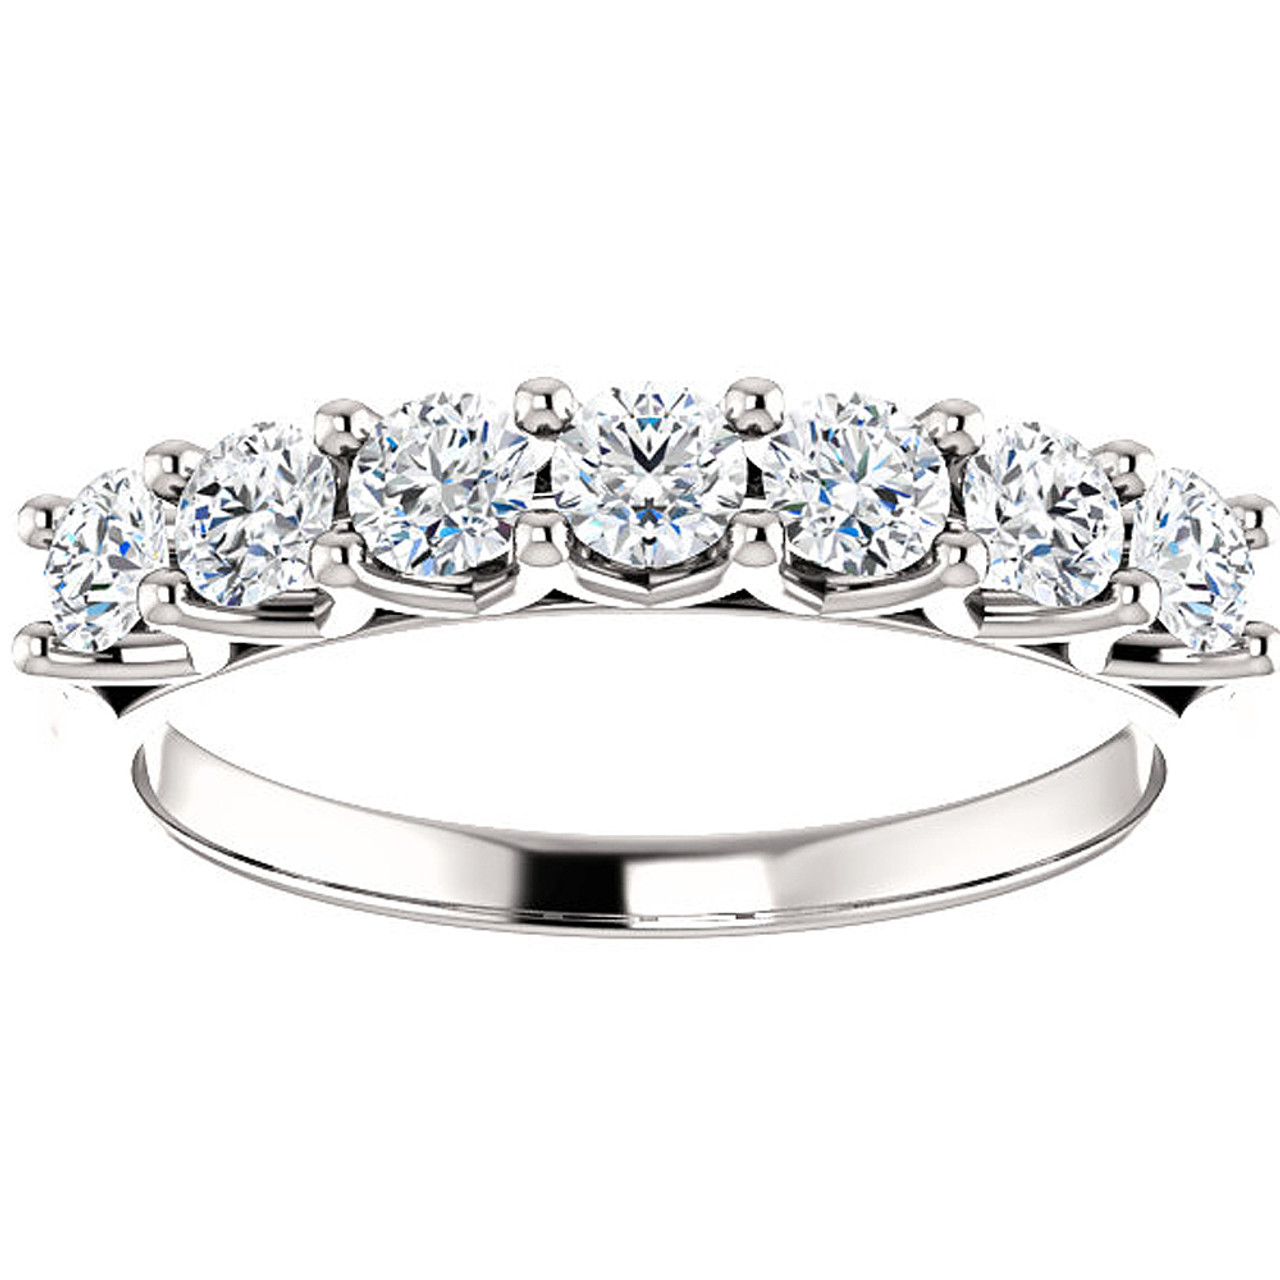 7 Stone Claw Wedding Ring with 1.61 Carat TW of Diamonds in 14kt White Gold